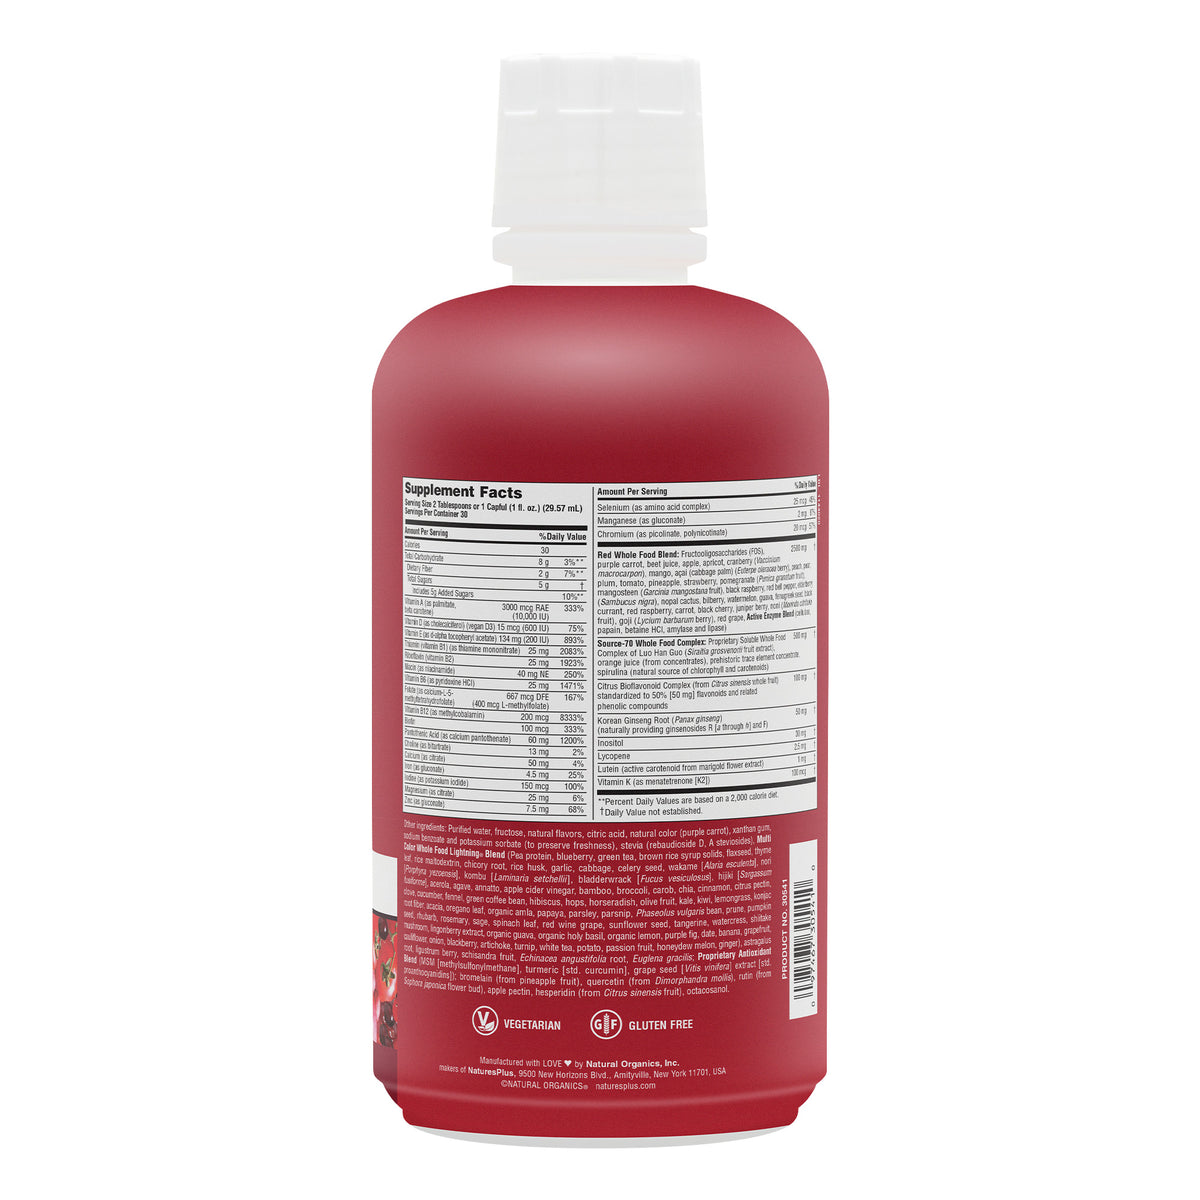 product image of Source of Life® RED Multivitamin Liquid containing 30 FL OZ